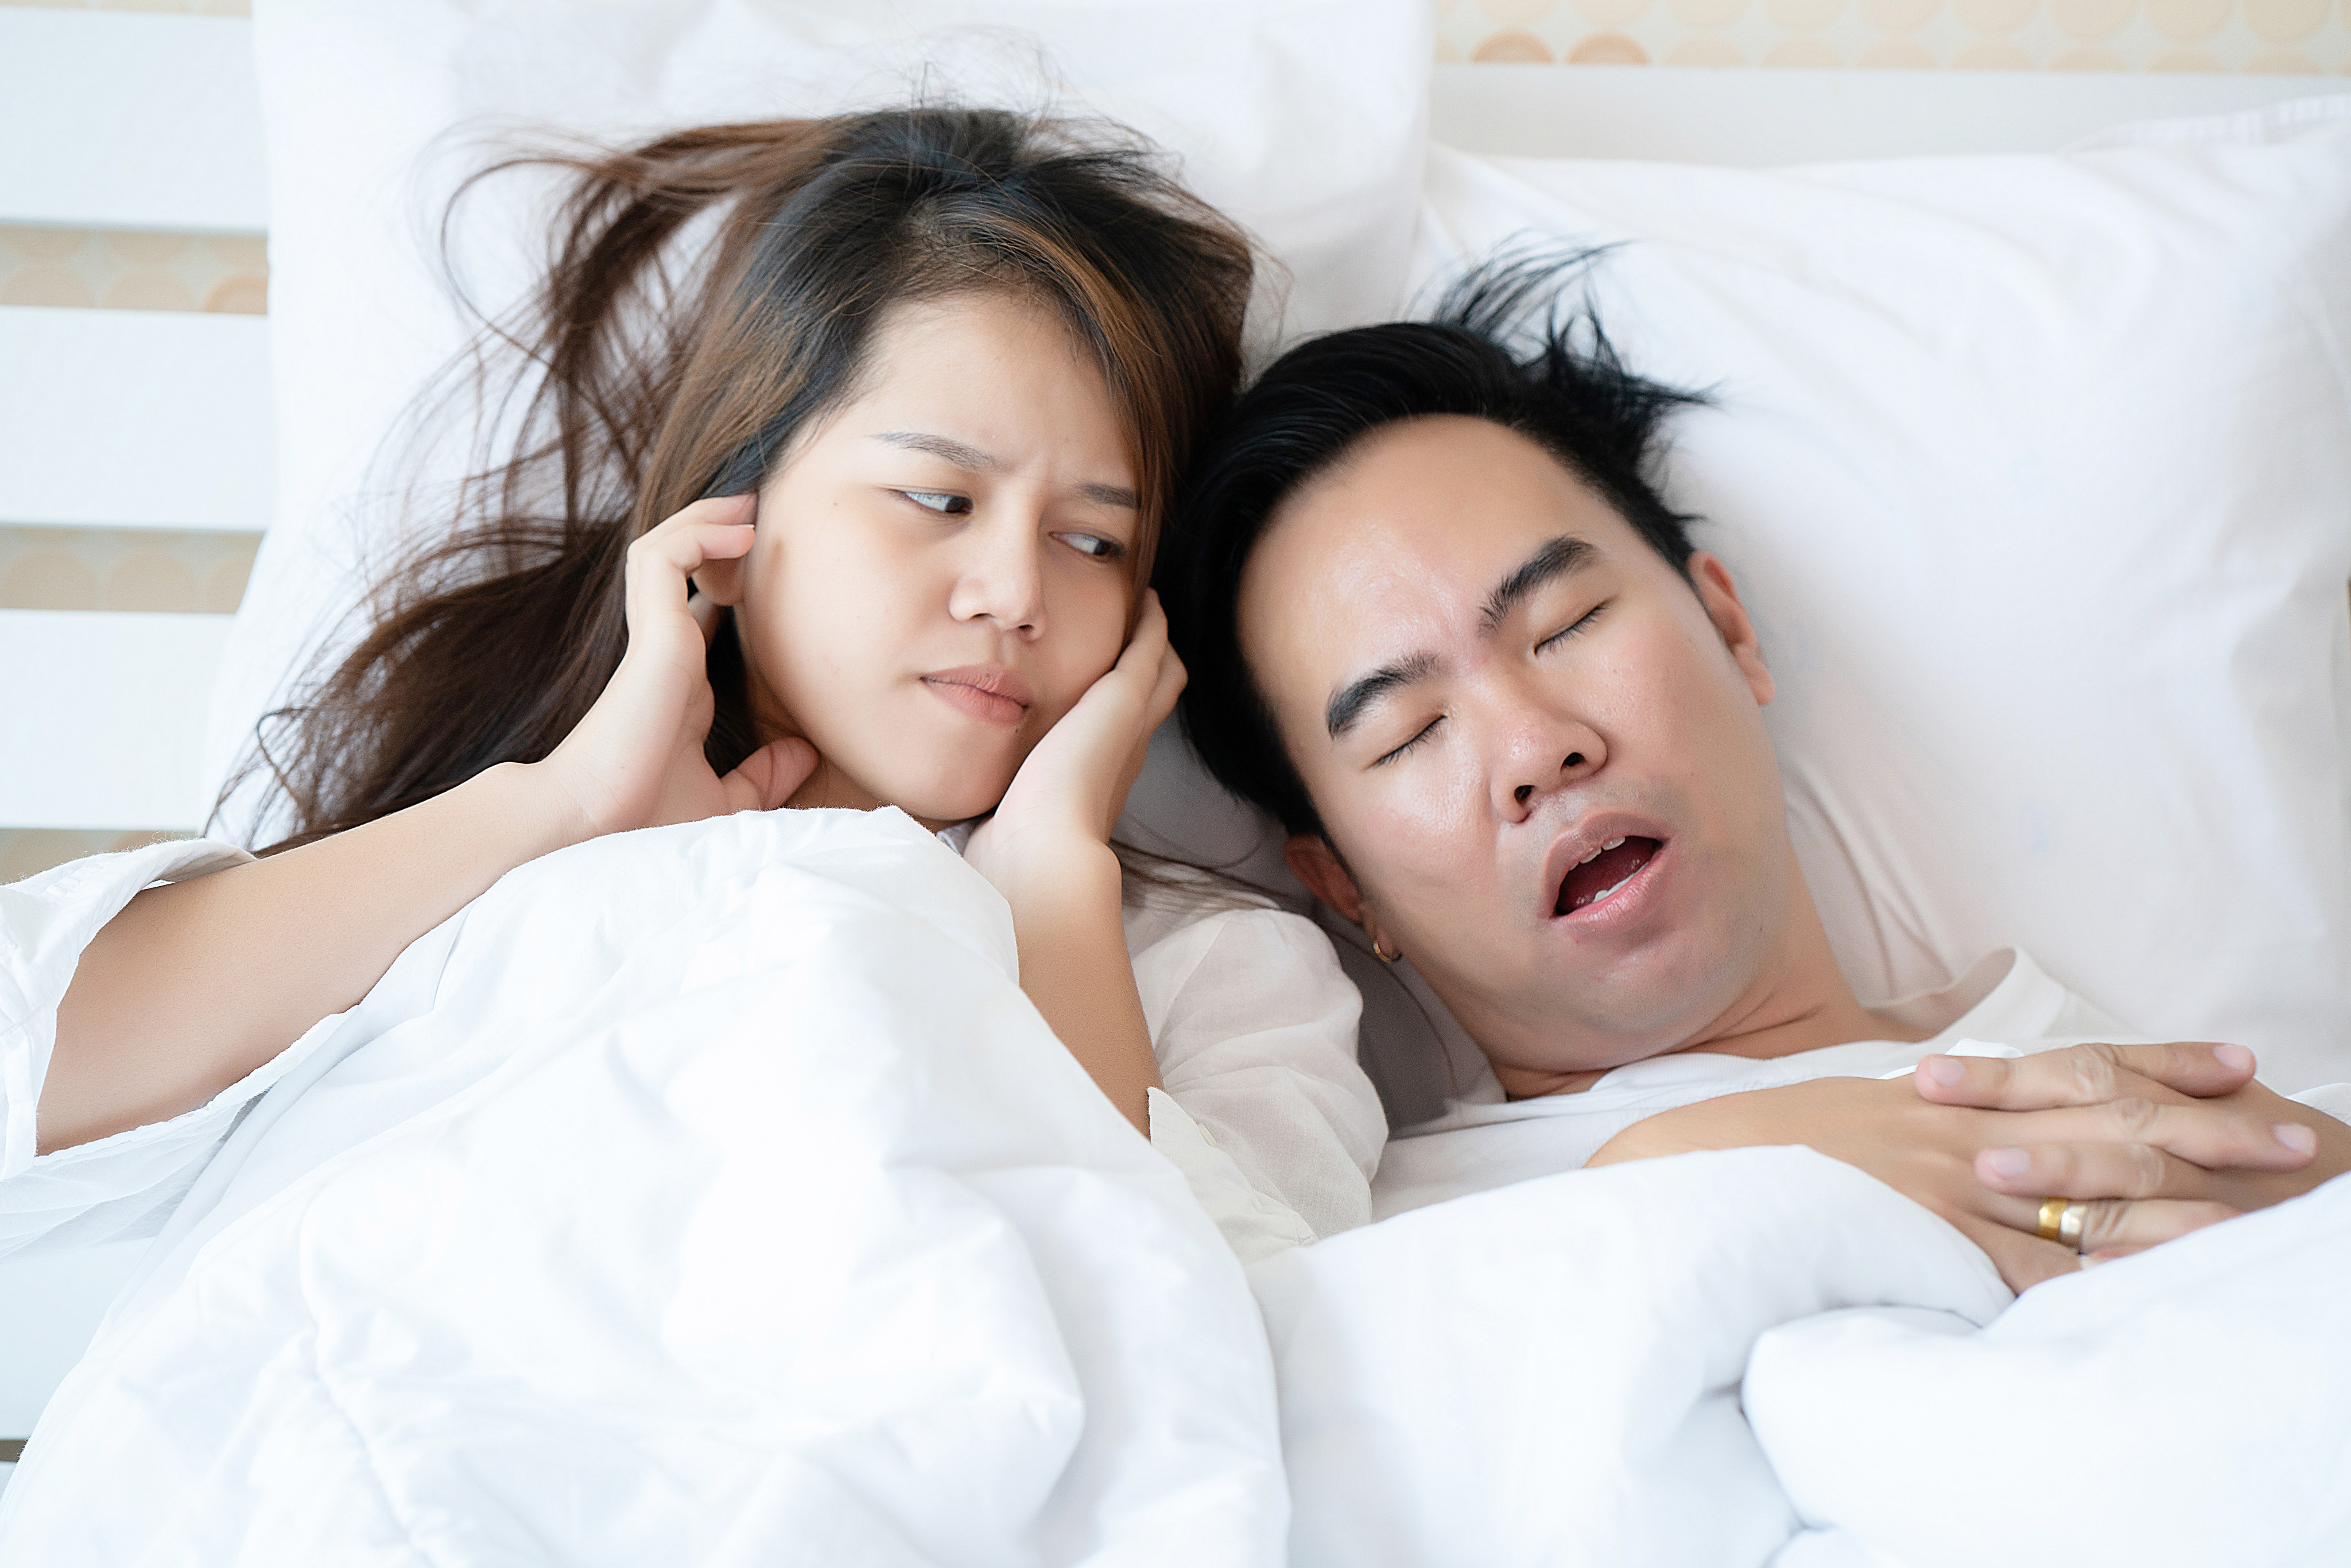 Obstructive sleep apnea, or OSA, is a potentially dangerous condition that should be taken seriously, a doctor says. Among the most common warning signs is persistent loud snoring. Photo: Shutterstock